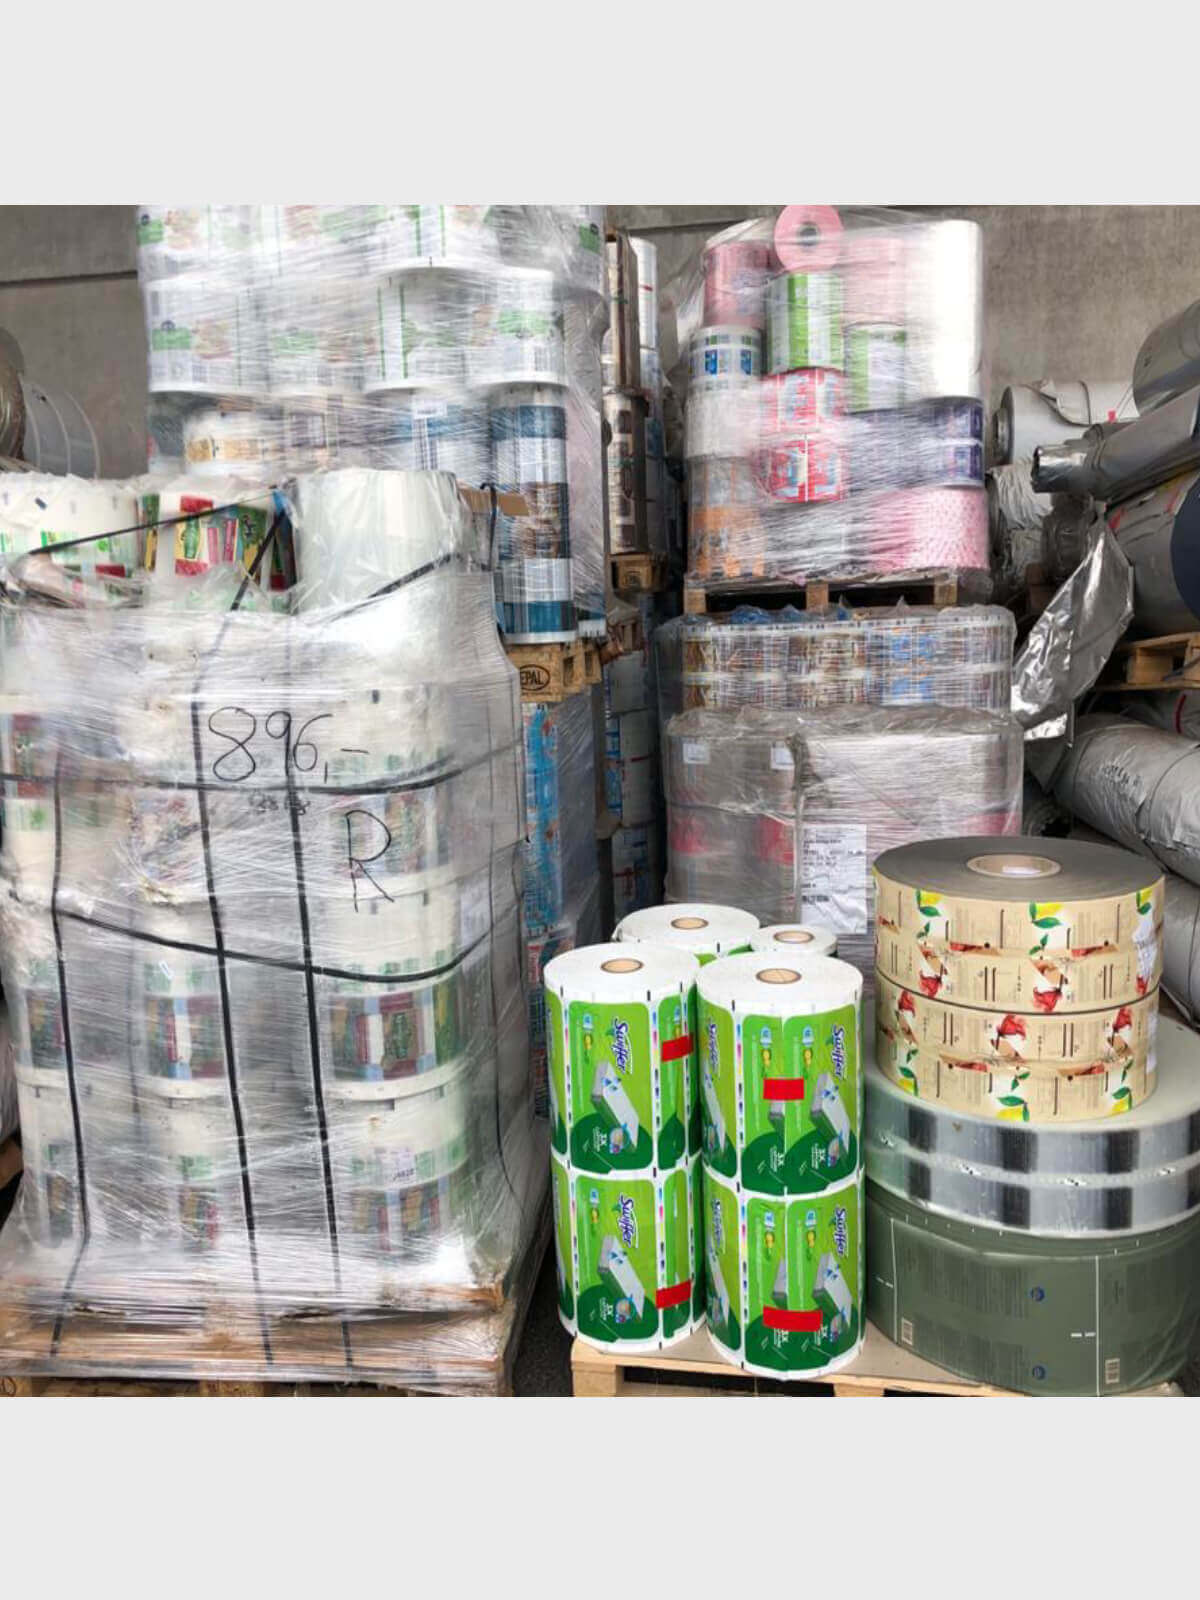 Stocklot Of Printed Film In Syria